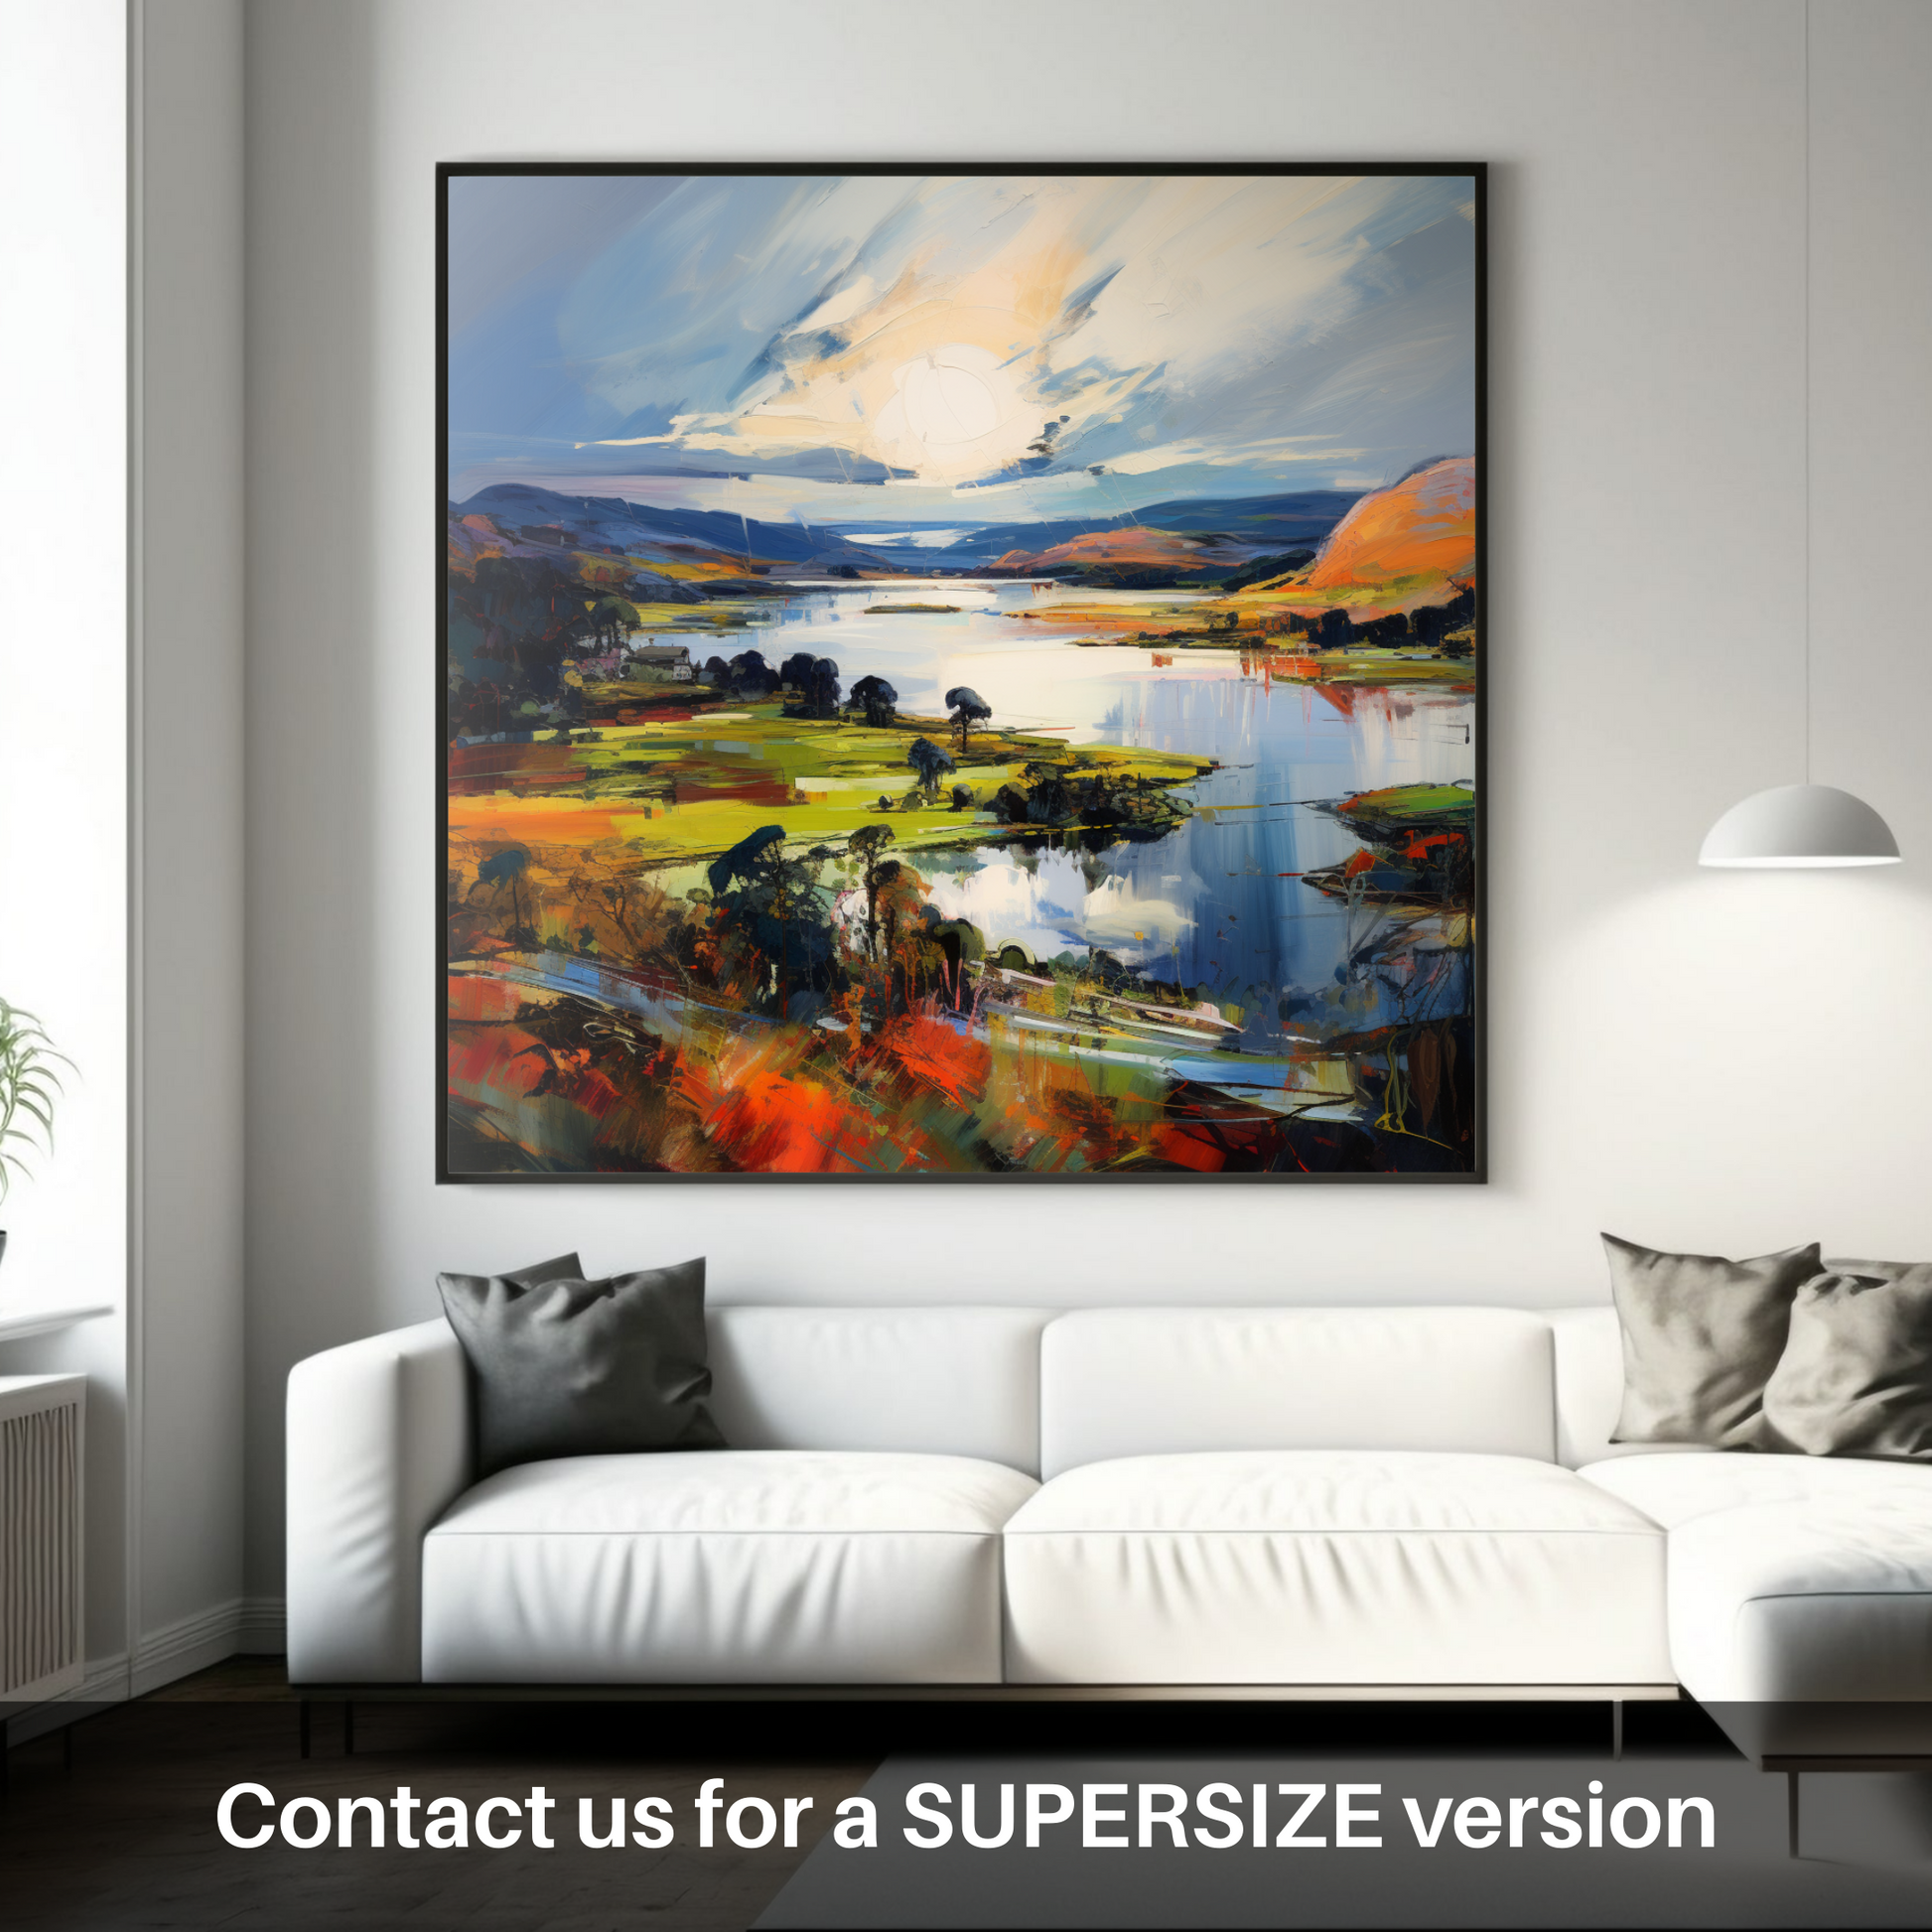 Huge supersize print of Loch Leven, Perth and Kinross